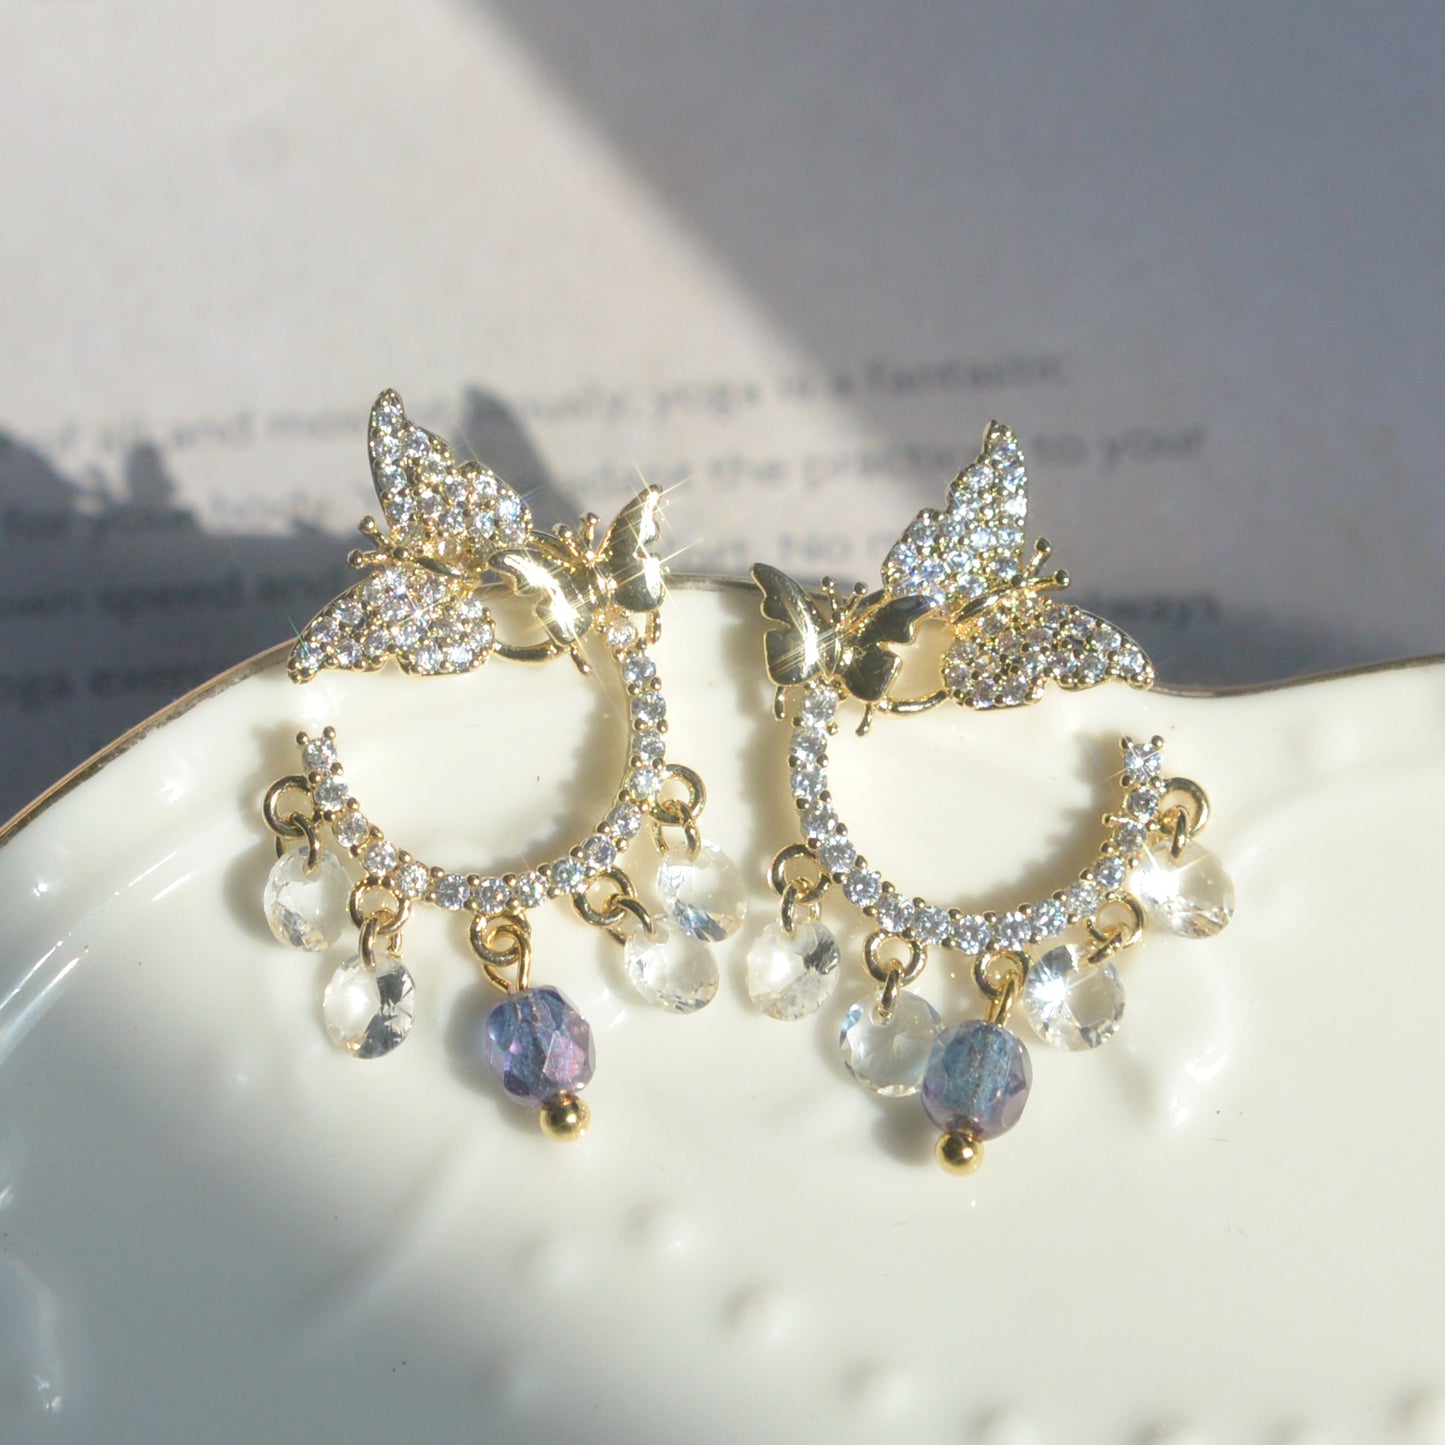 Original Butterfly Wreath Earrings Are Sweet And Exquisite